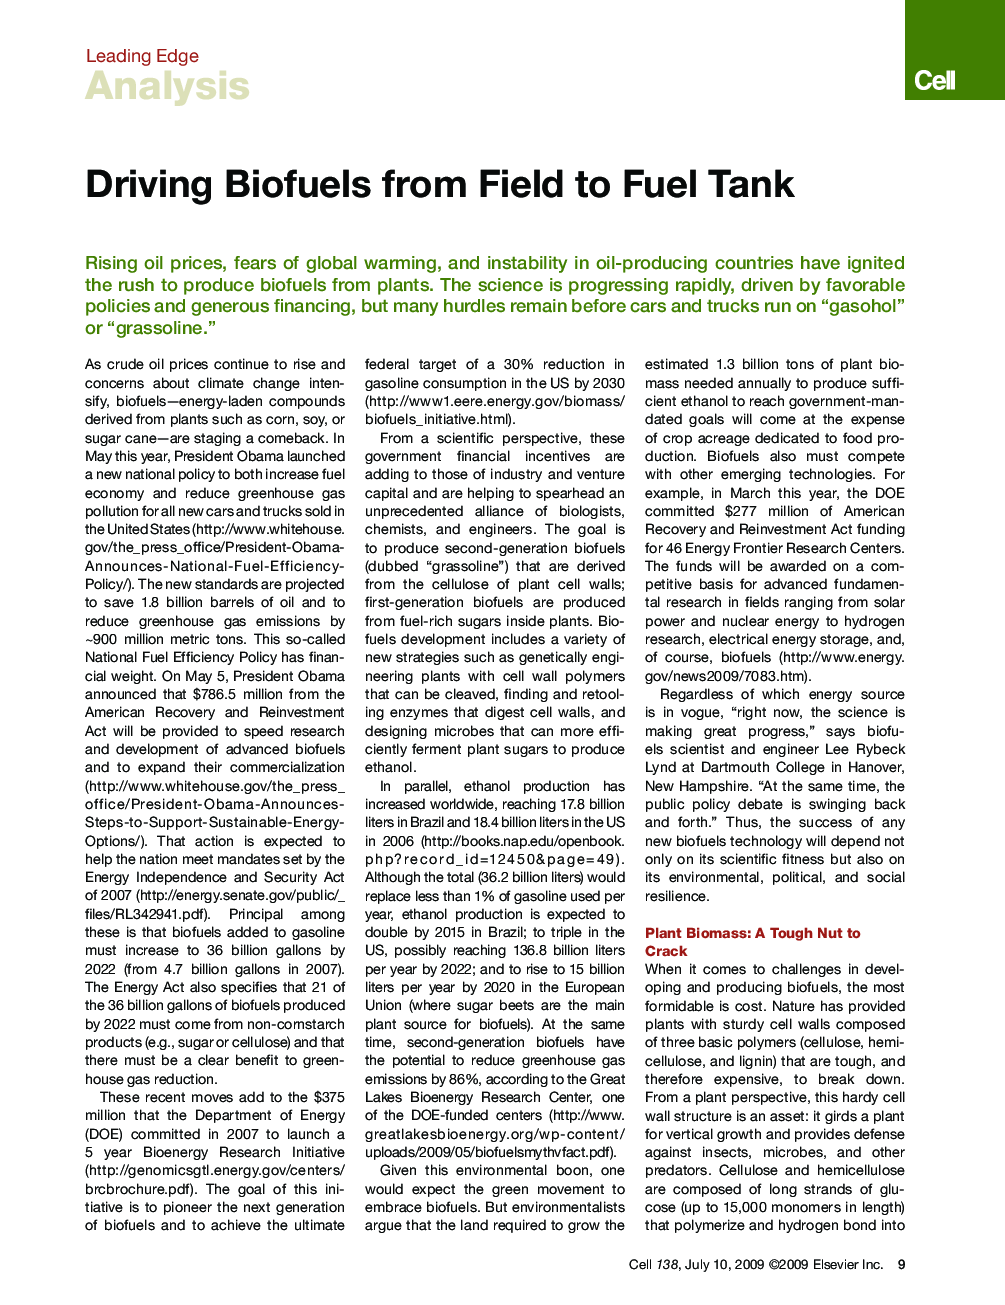 Driving Biofuels from Field to Fuel Tank